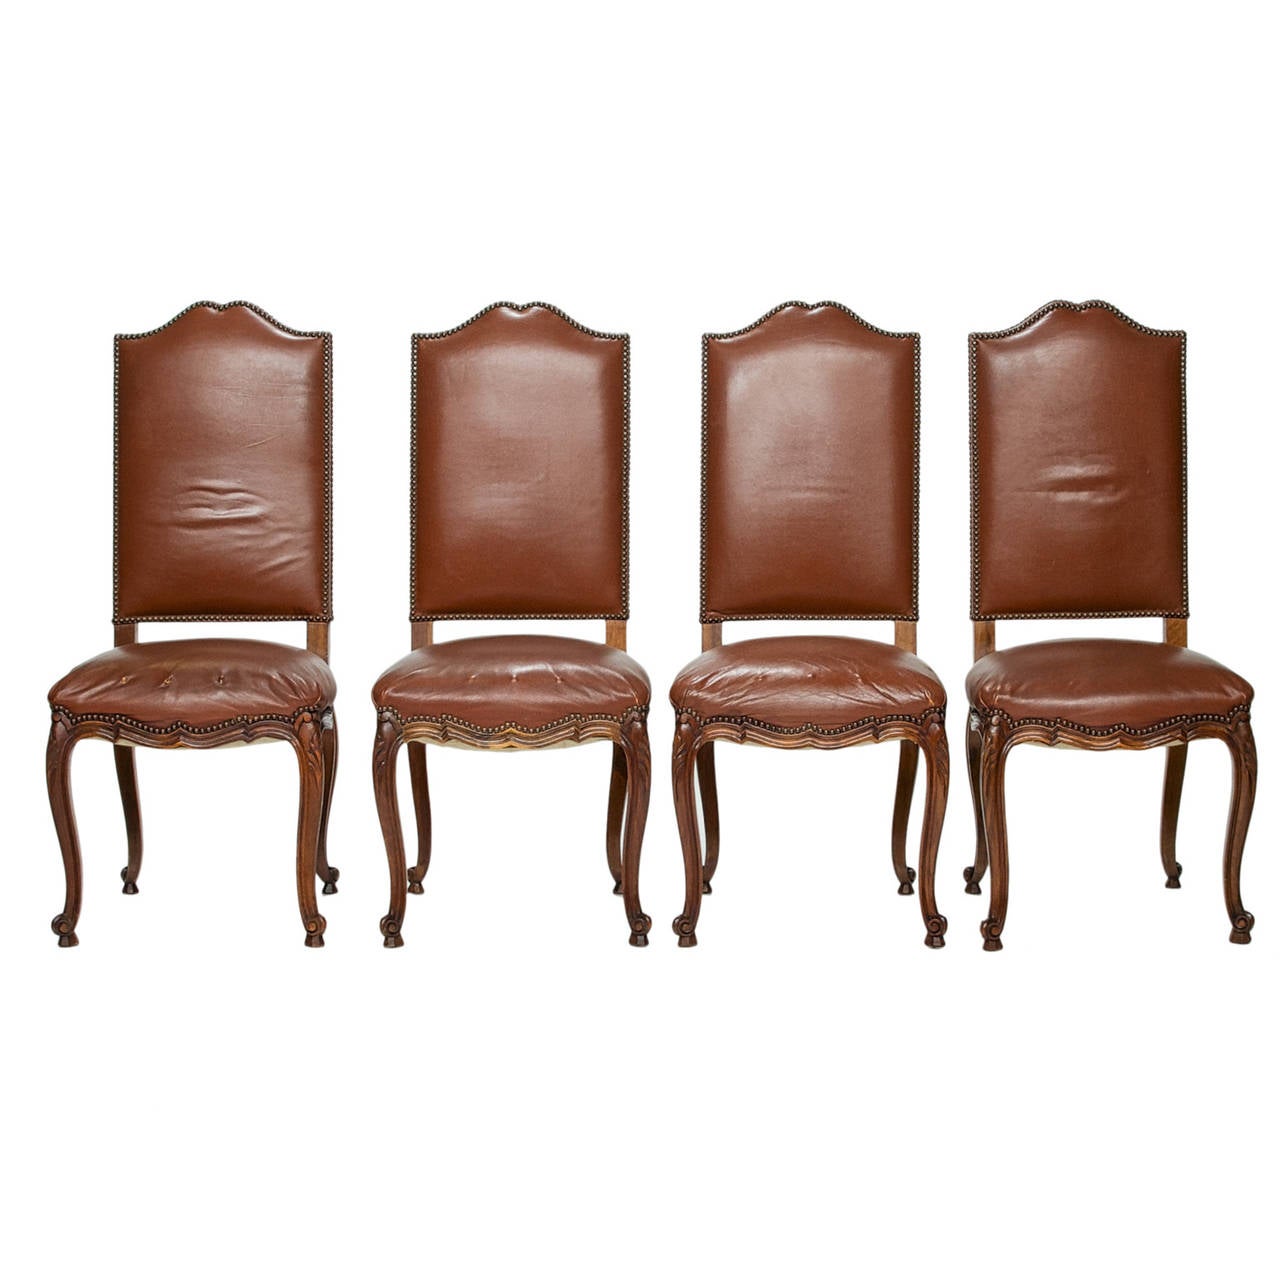 A Fine Set Of 8 French Beechwood Side Chairs

A nice set of 8 side chairs made of beechwood from France. This is a very desirable model and not always easy to find. This set is very sound and sturdy for everyday use. These have a wonderful Walnut